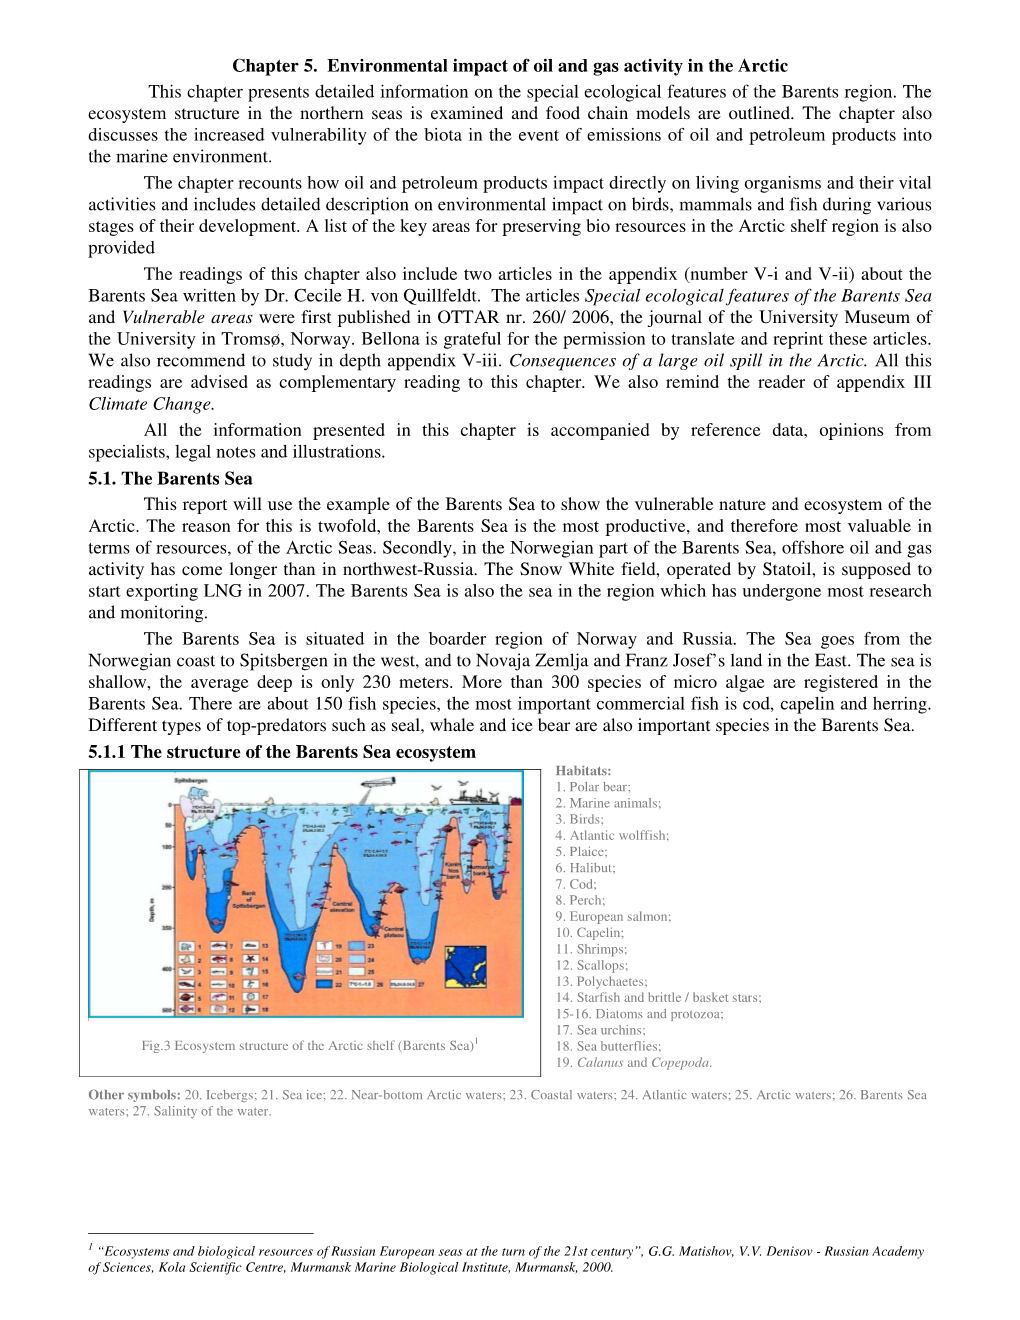 Chapter 5. Environmental Impact of Oil and Gas Activity in the Arctic This